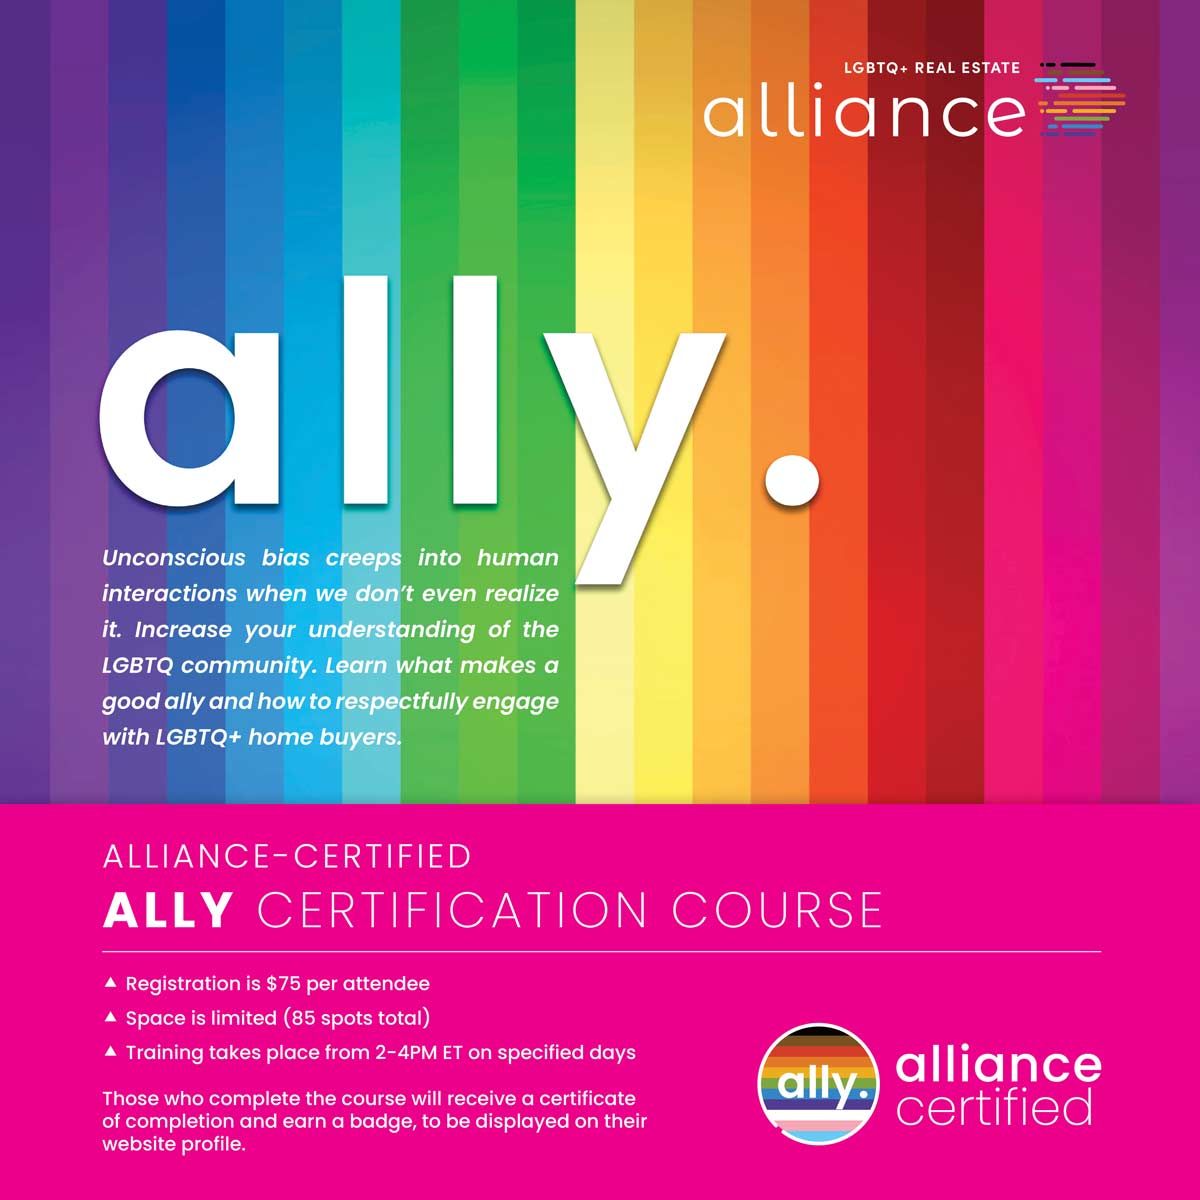 Image of Alliance Certification Course flyer